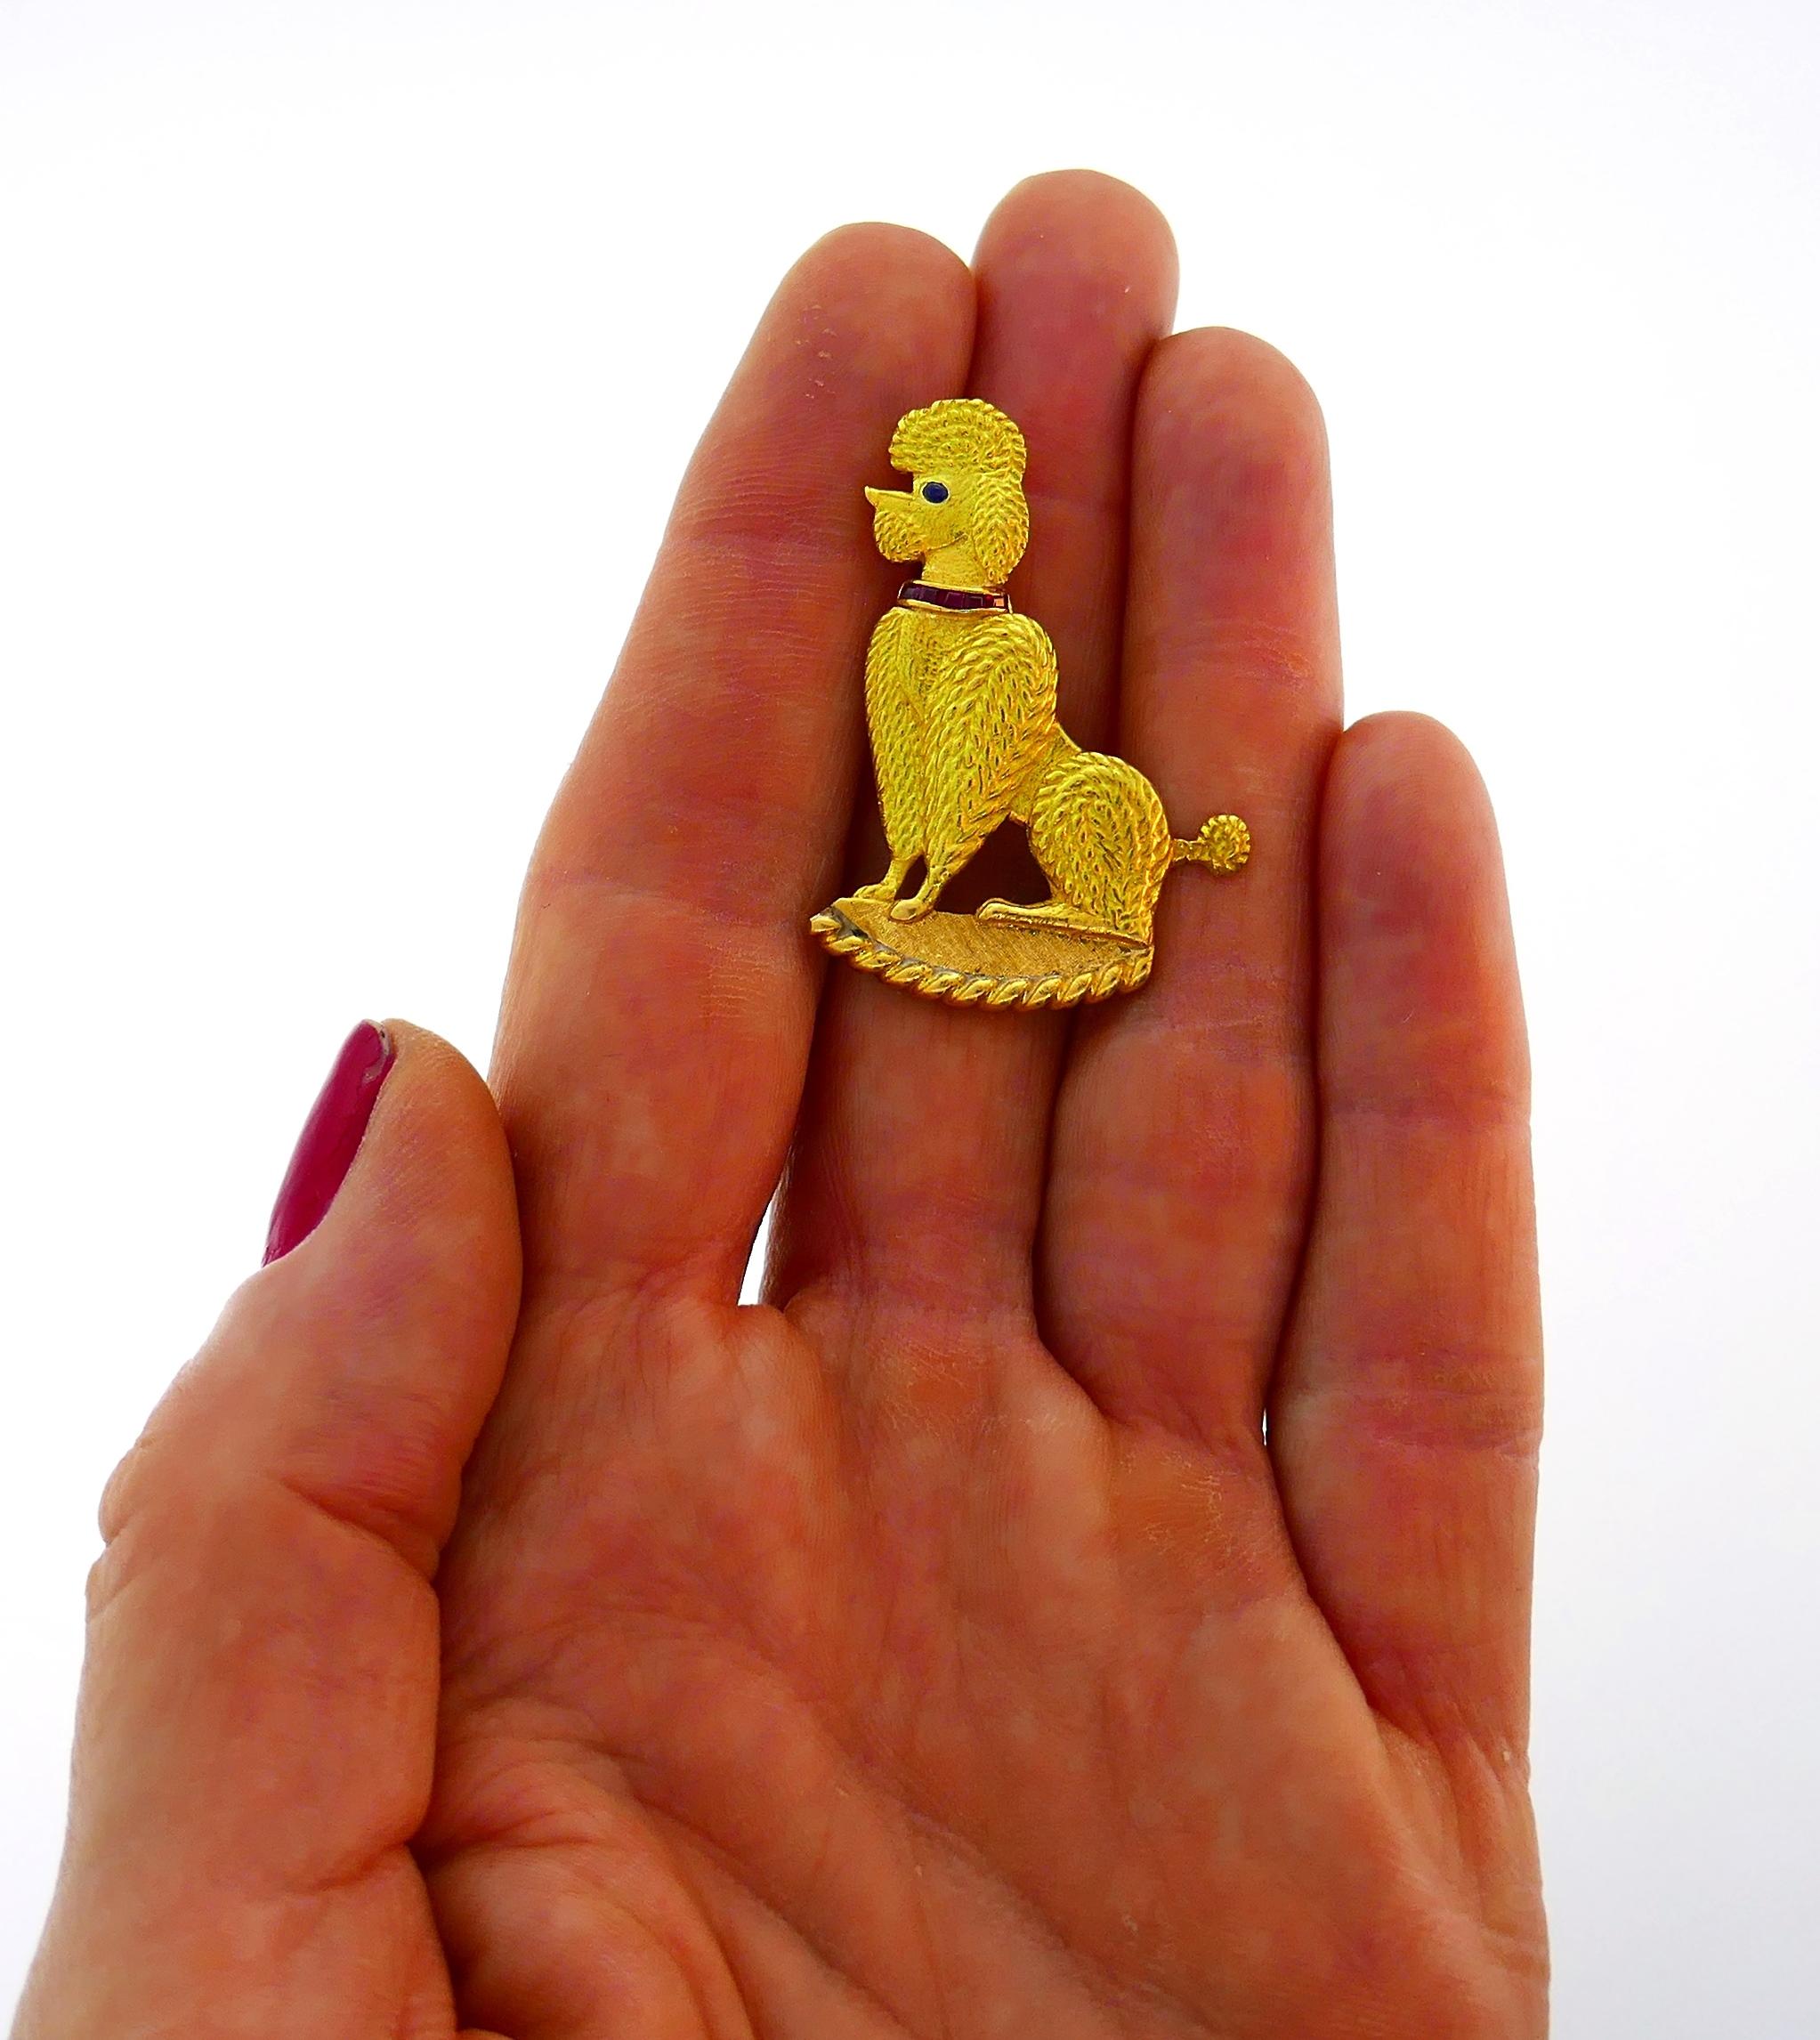 An iconic poodle pin created by Cartier in the 1950s. Cute and joyful, the pin is a great addition to your jewelry collection.
The pin is made of 18 karat (stamped) yellow gold, the poodle's collar is encrusted with pre-cut rubies and its eye is